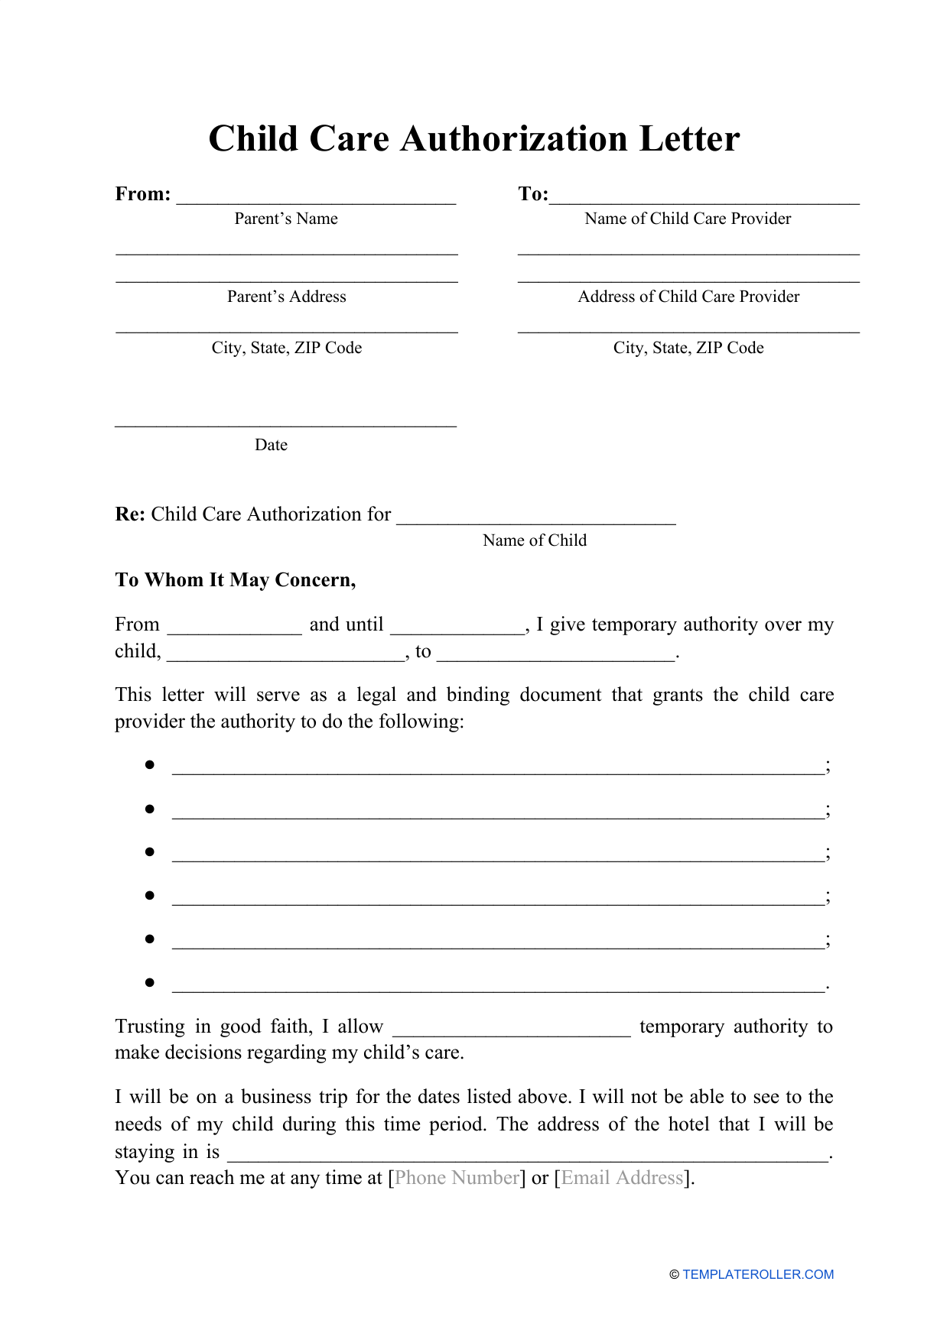 Child Care Authorization Letter Template Preview